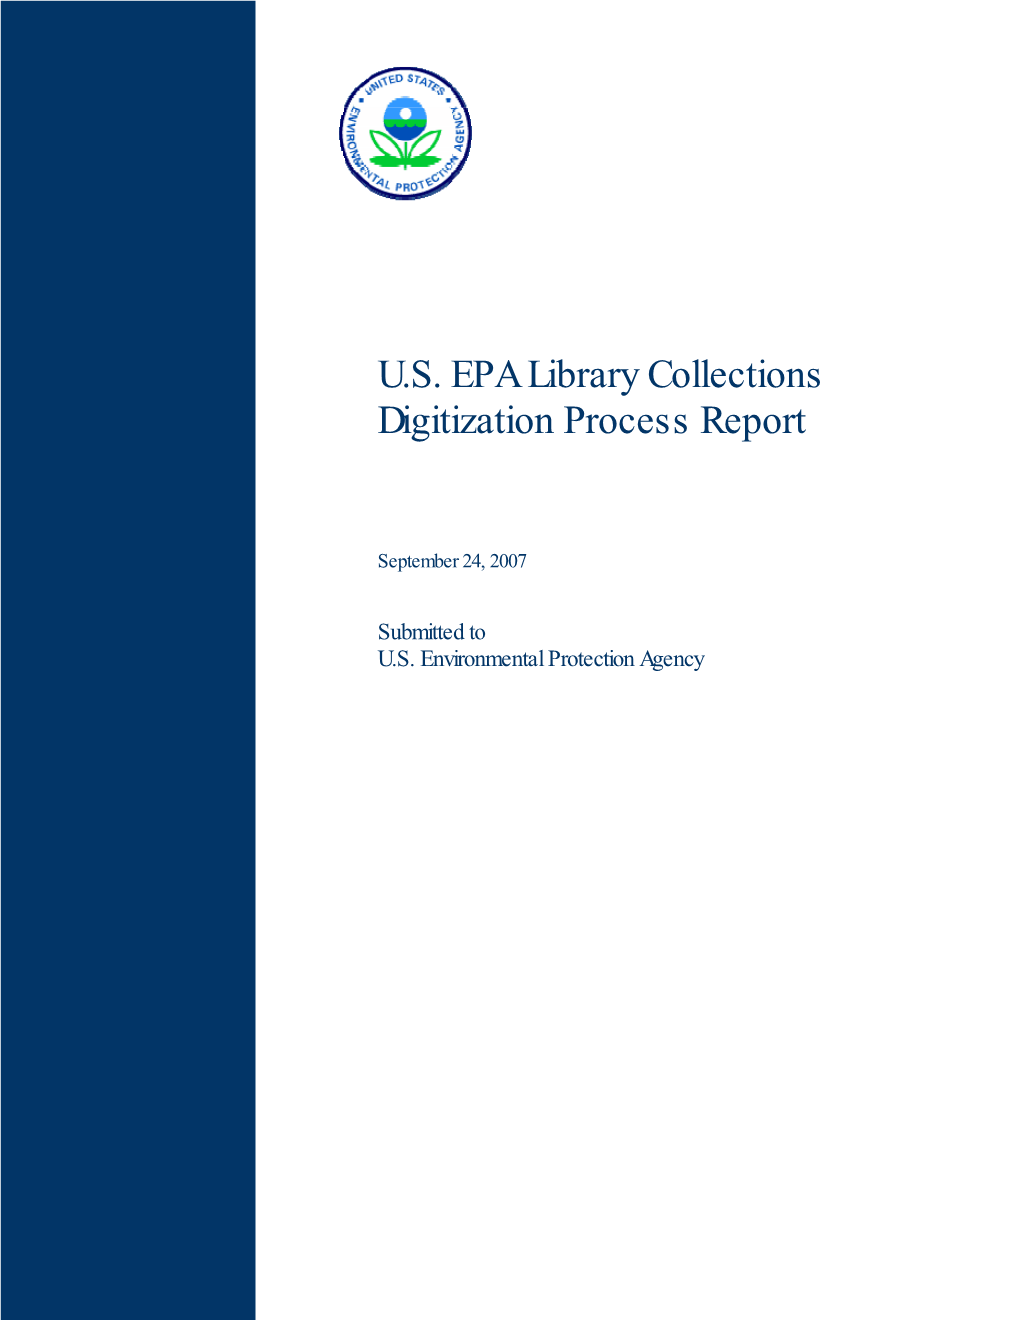 U.S. EPA Library Collections Digitization Process Report